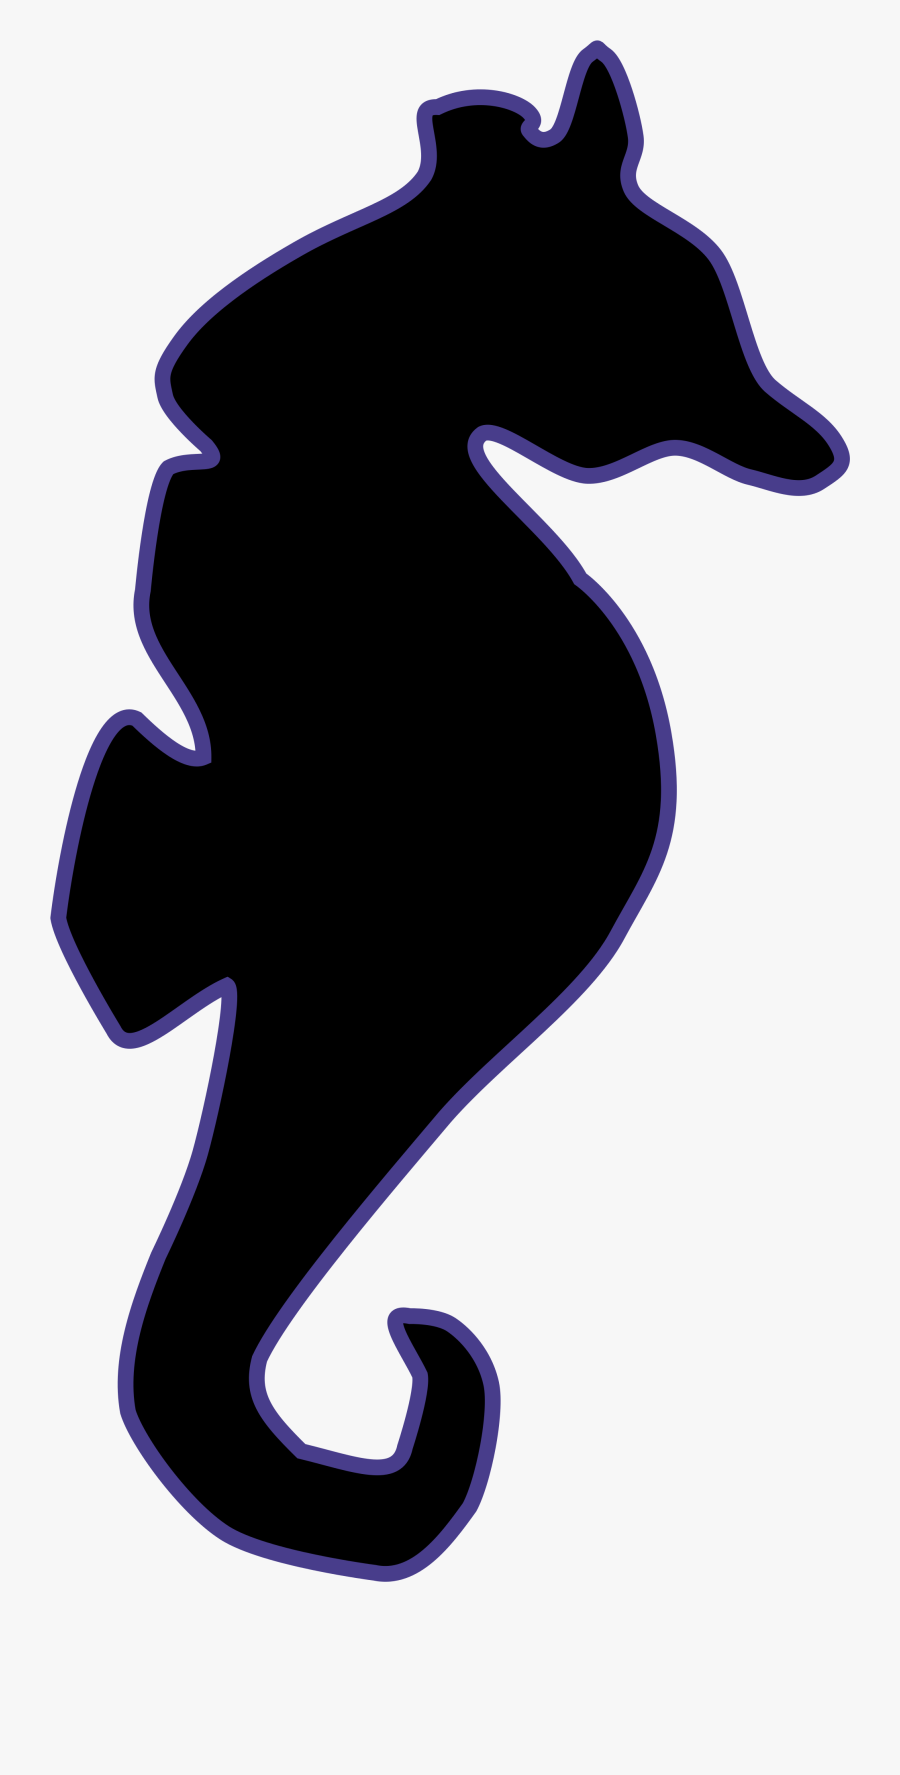 File - Seahorse - Svg - Wikimedia Commons - Wikimedia, Transparent Clipart